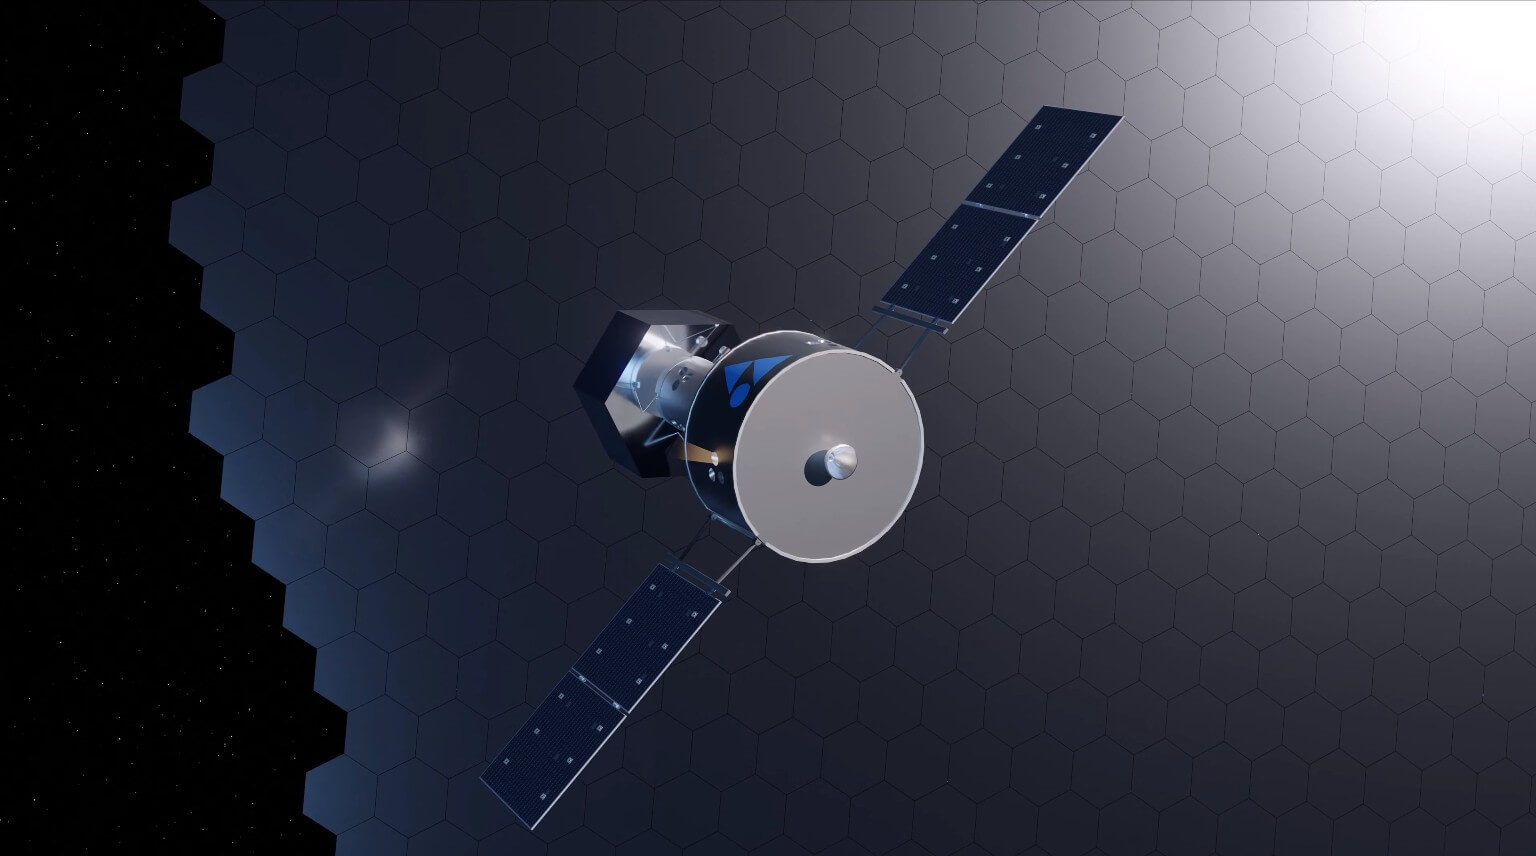 A still from a Victus Solis promotional video showing an in-space manufacturing spacecraft manoeuvring a solar power element into place in a large array.